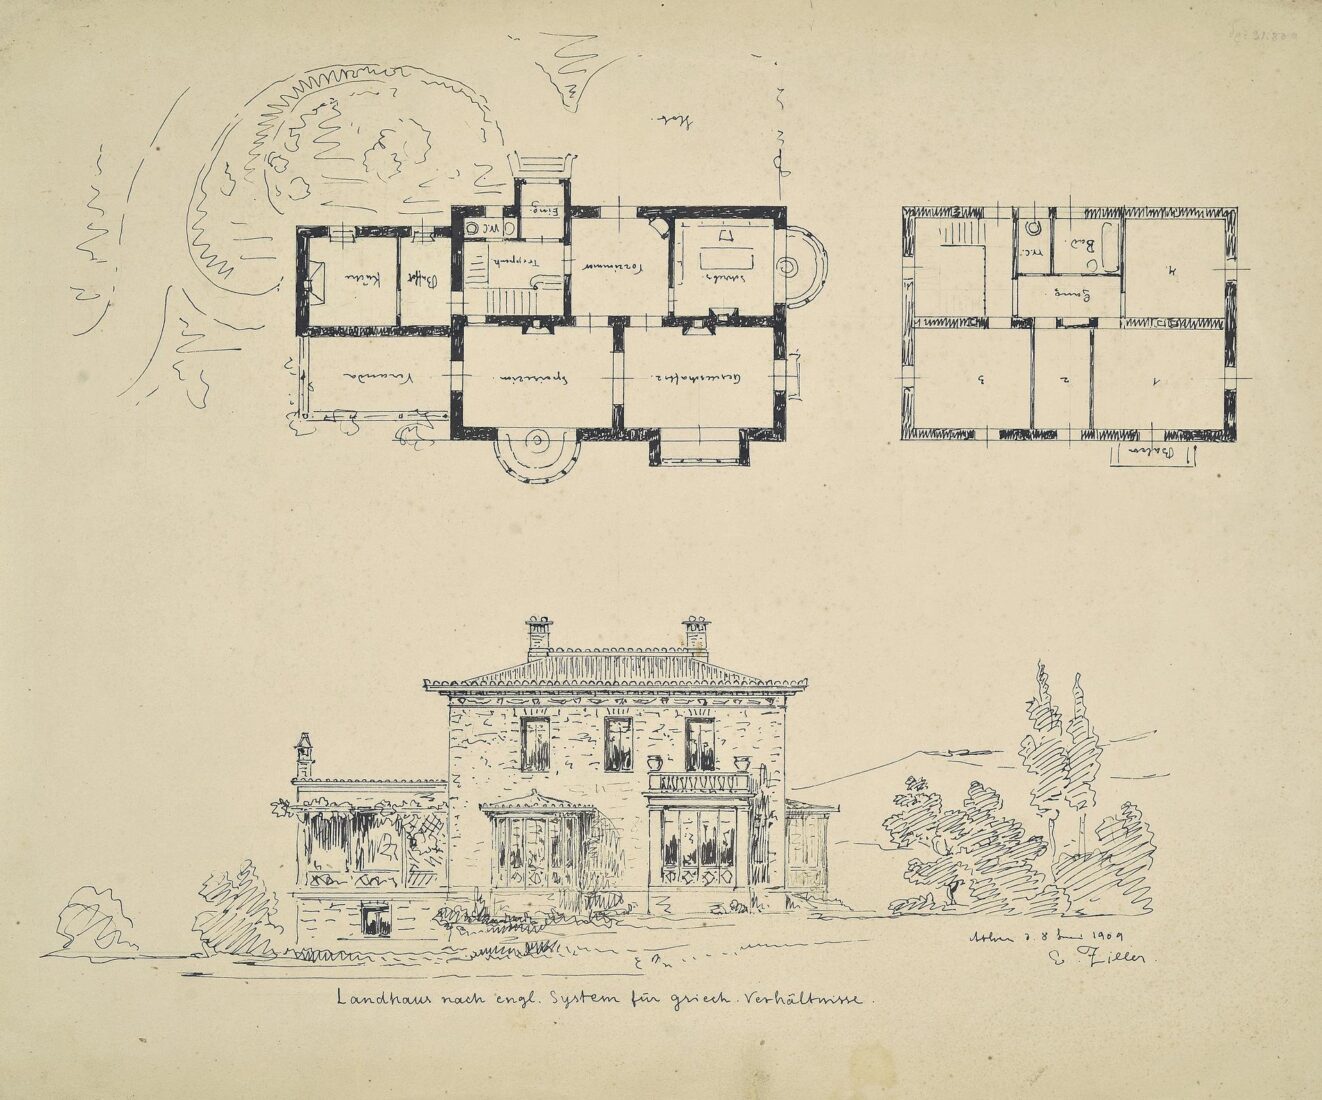 English Style Country House [Cottage] for Greek Standards for the Ziller District in “Kokkina Horafia” [Red Fields], Kifisia, Main Facade, Floor Plans - Ziller Ernst